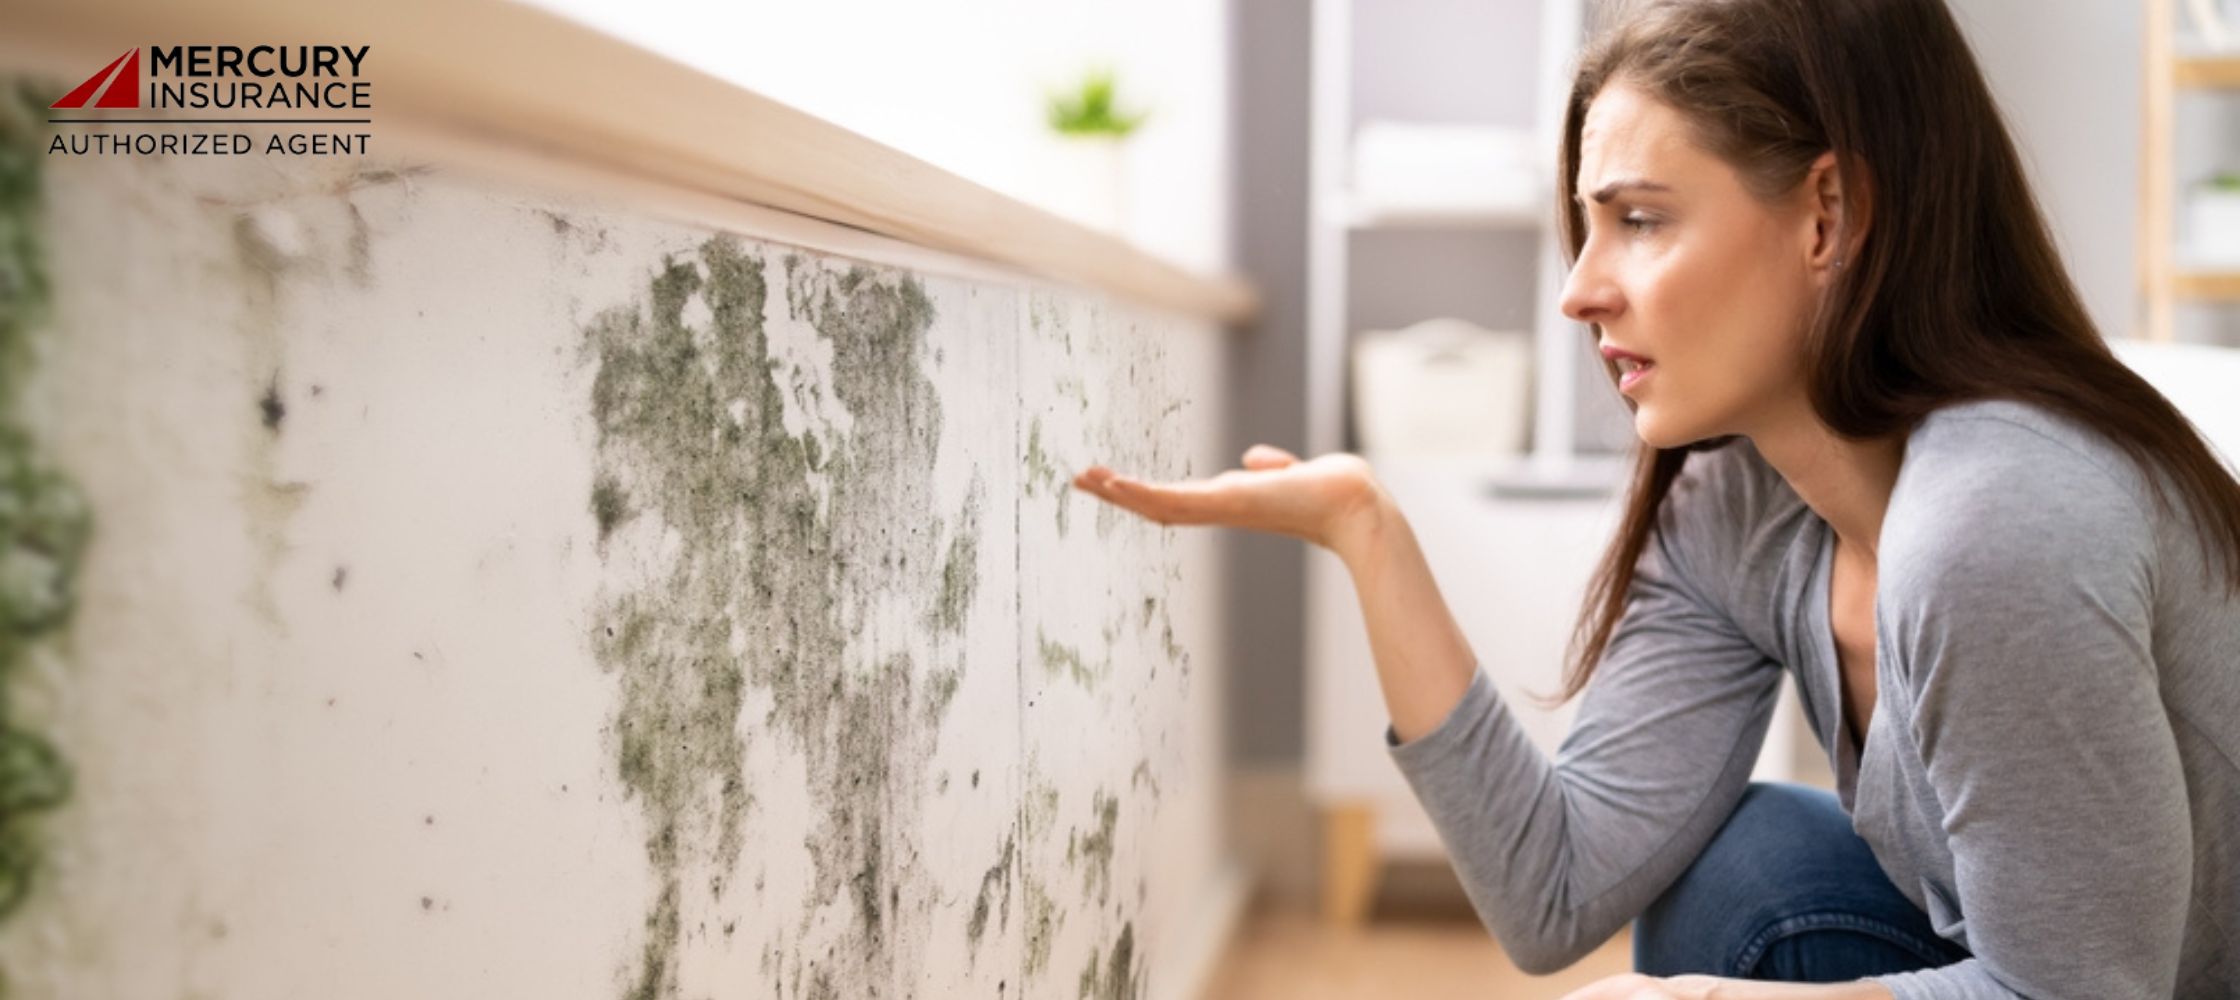 Does Your Homeowners Insurance Include Mold Coverage?